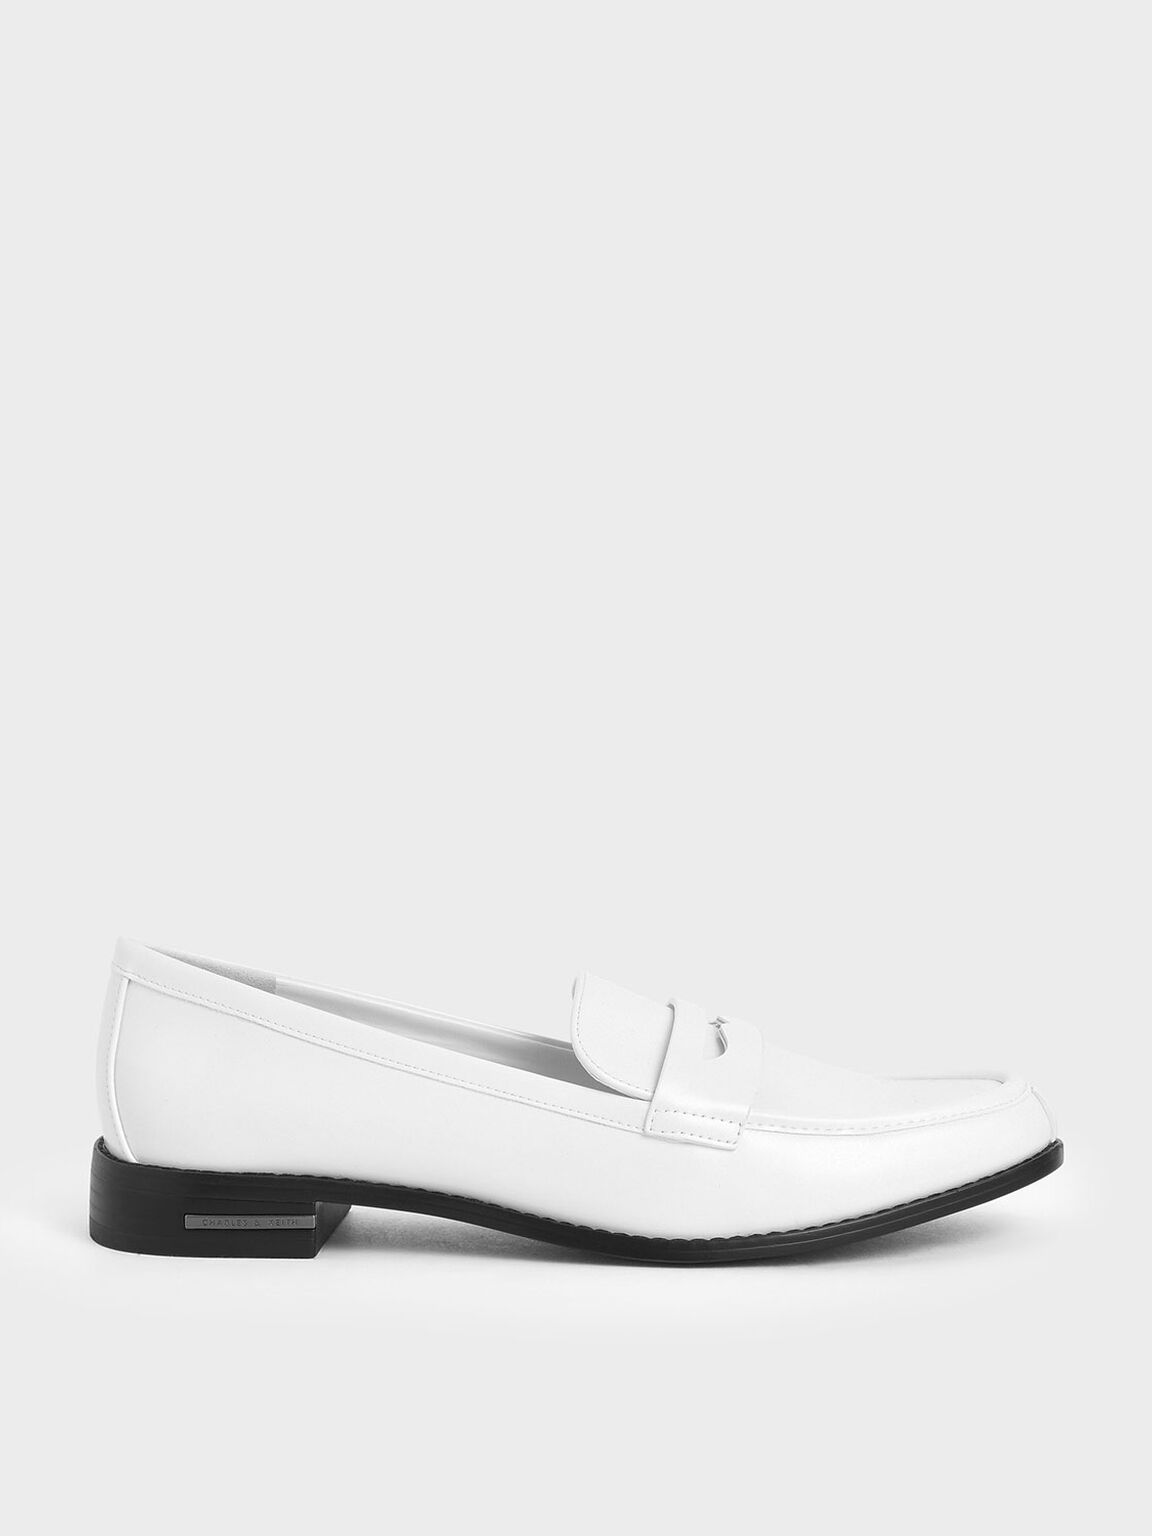 Penny Loafers, White, hi-res